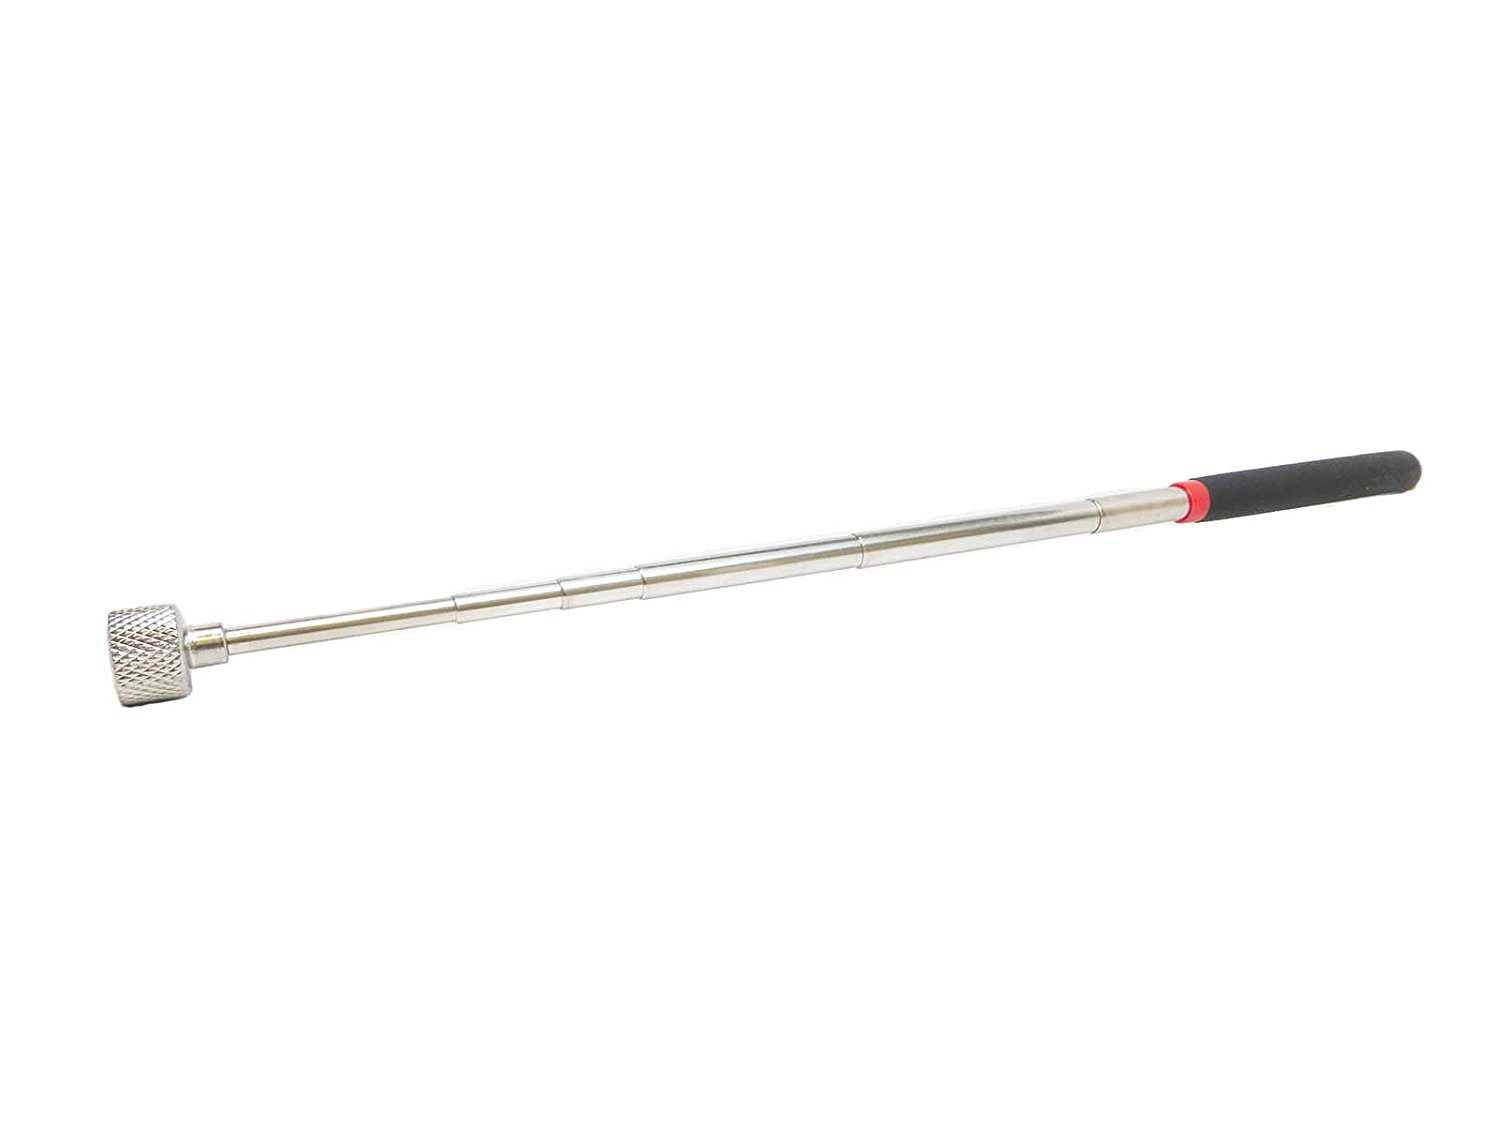 totalElement 30 Inch Telescoping Strong Magnetic Pick-Up Tool w/ 15lb Pull Capacity